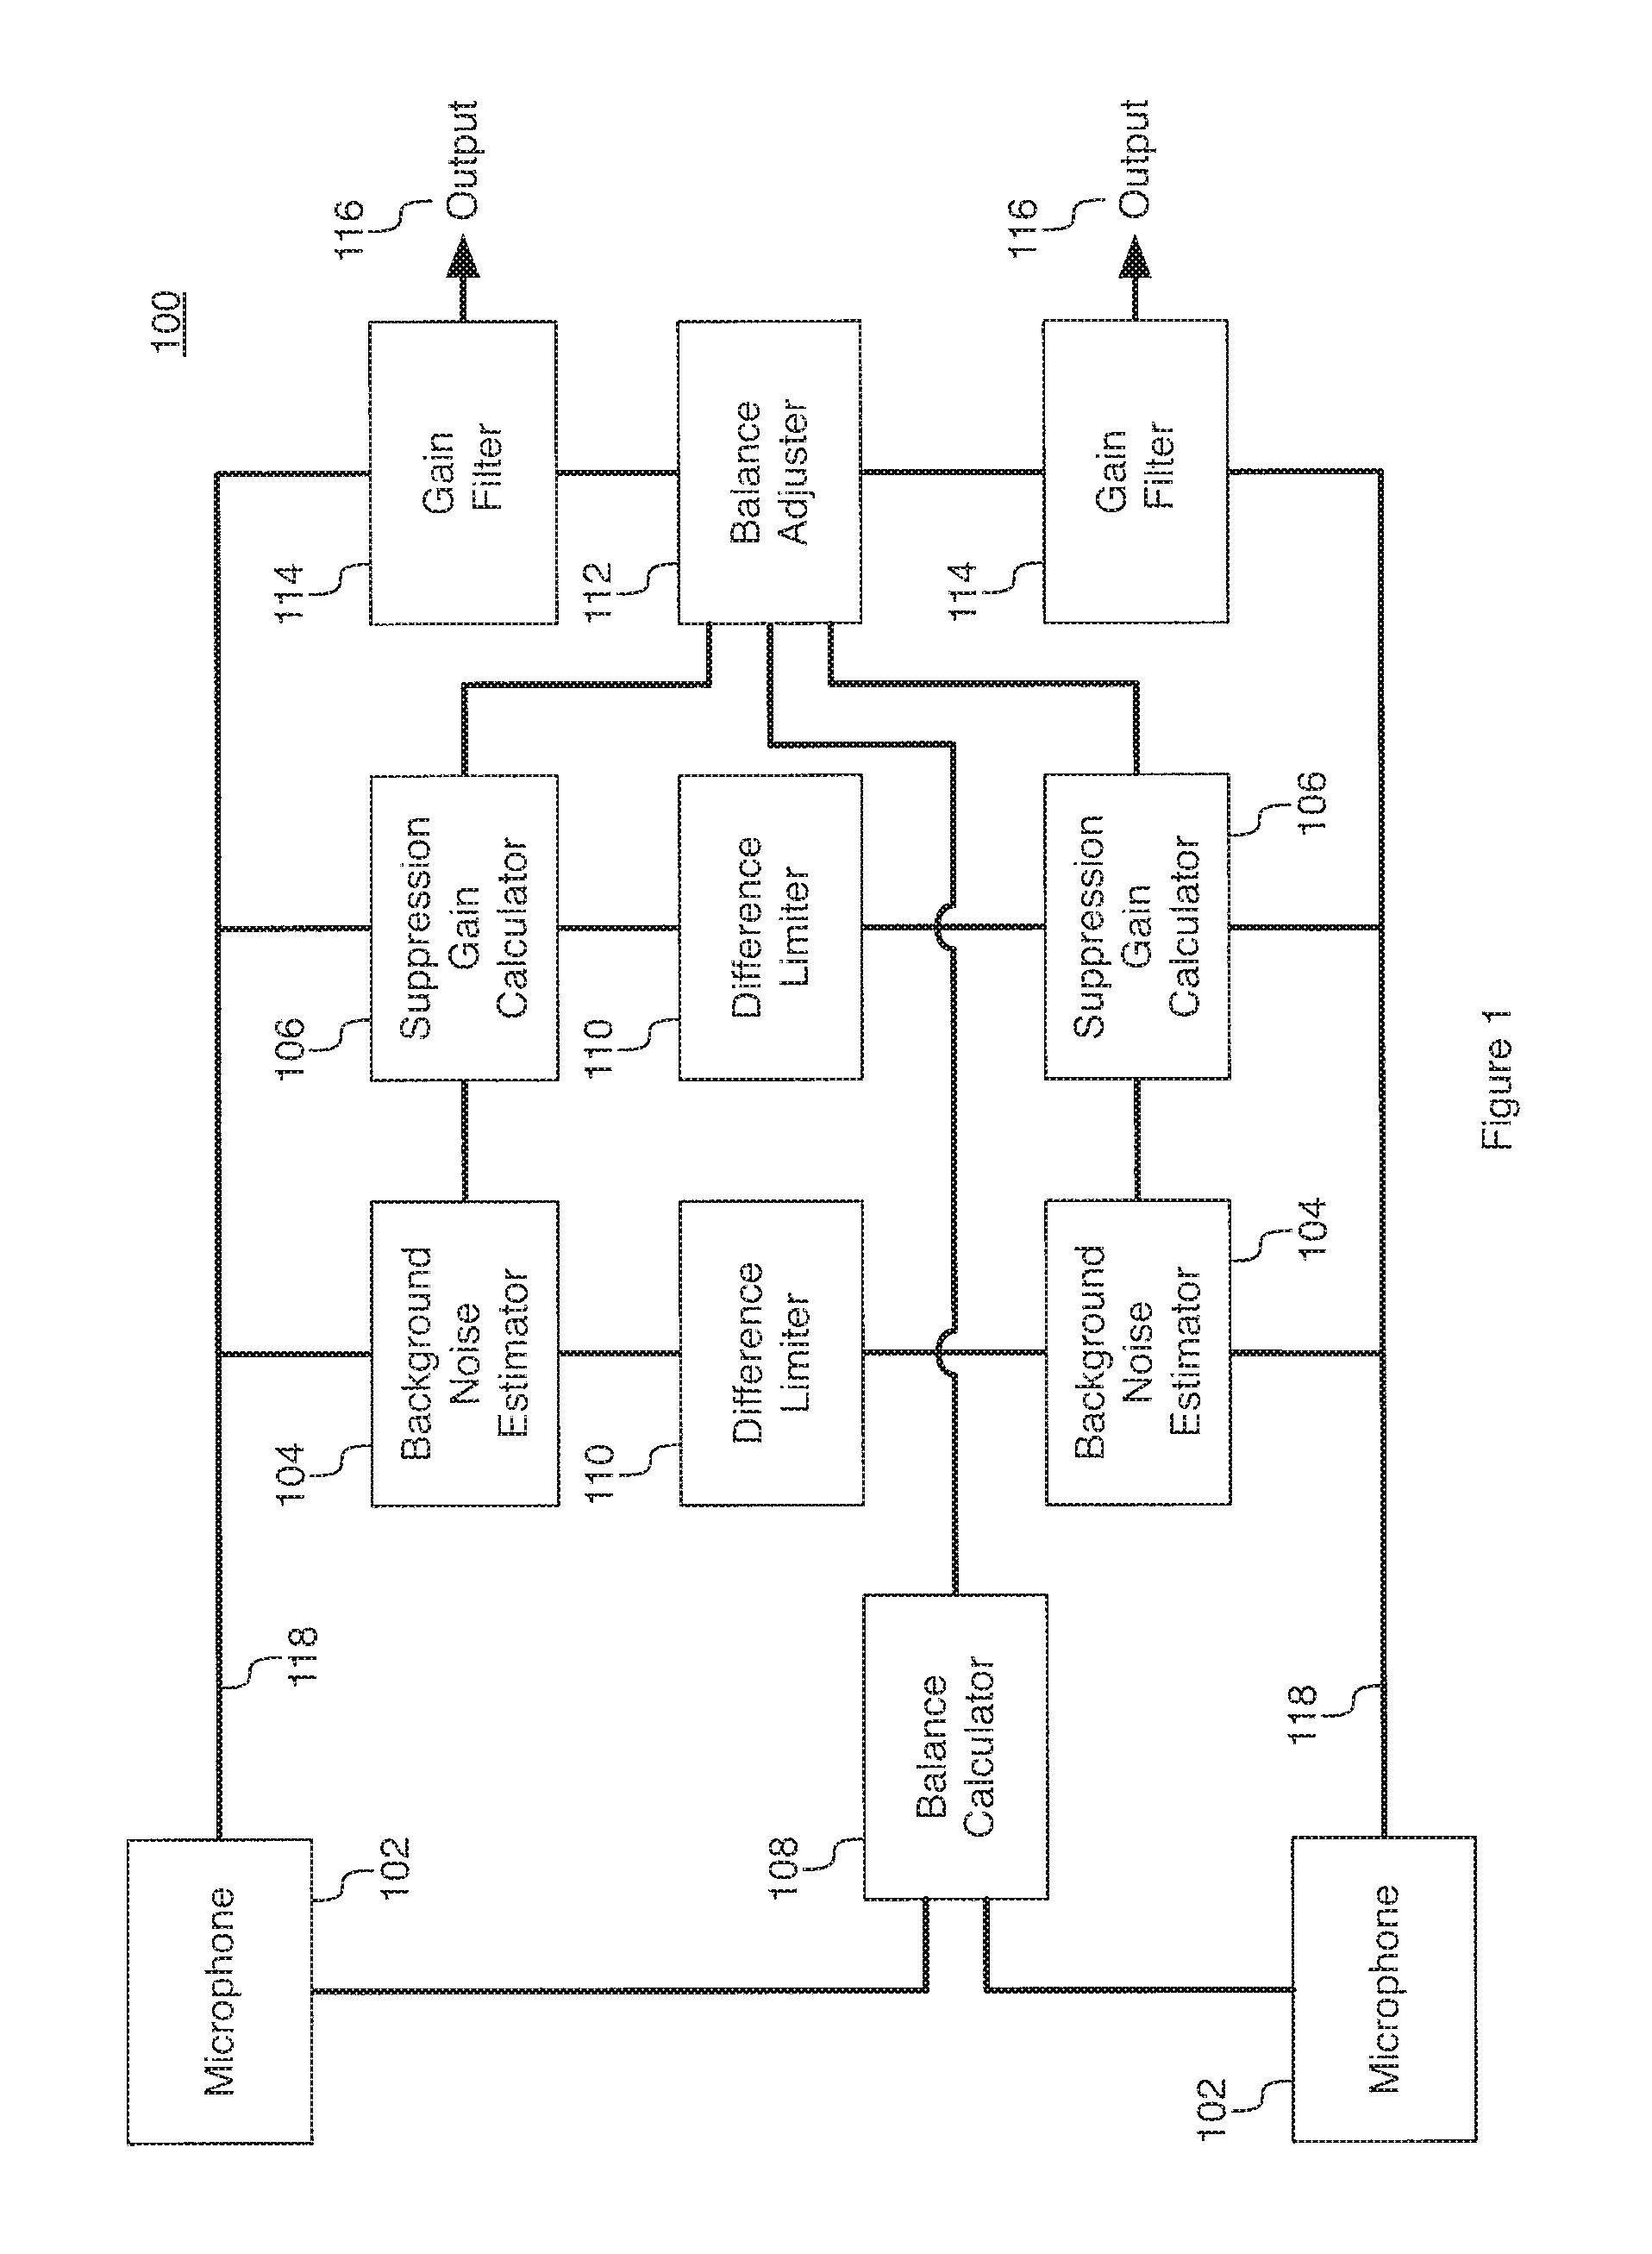 Sound field spatial stabilizer with structured noise compensation